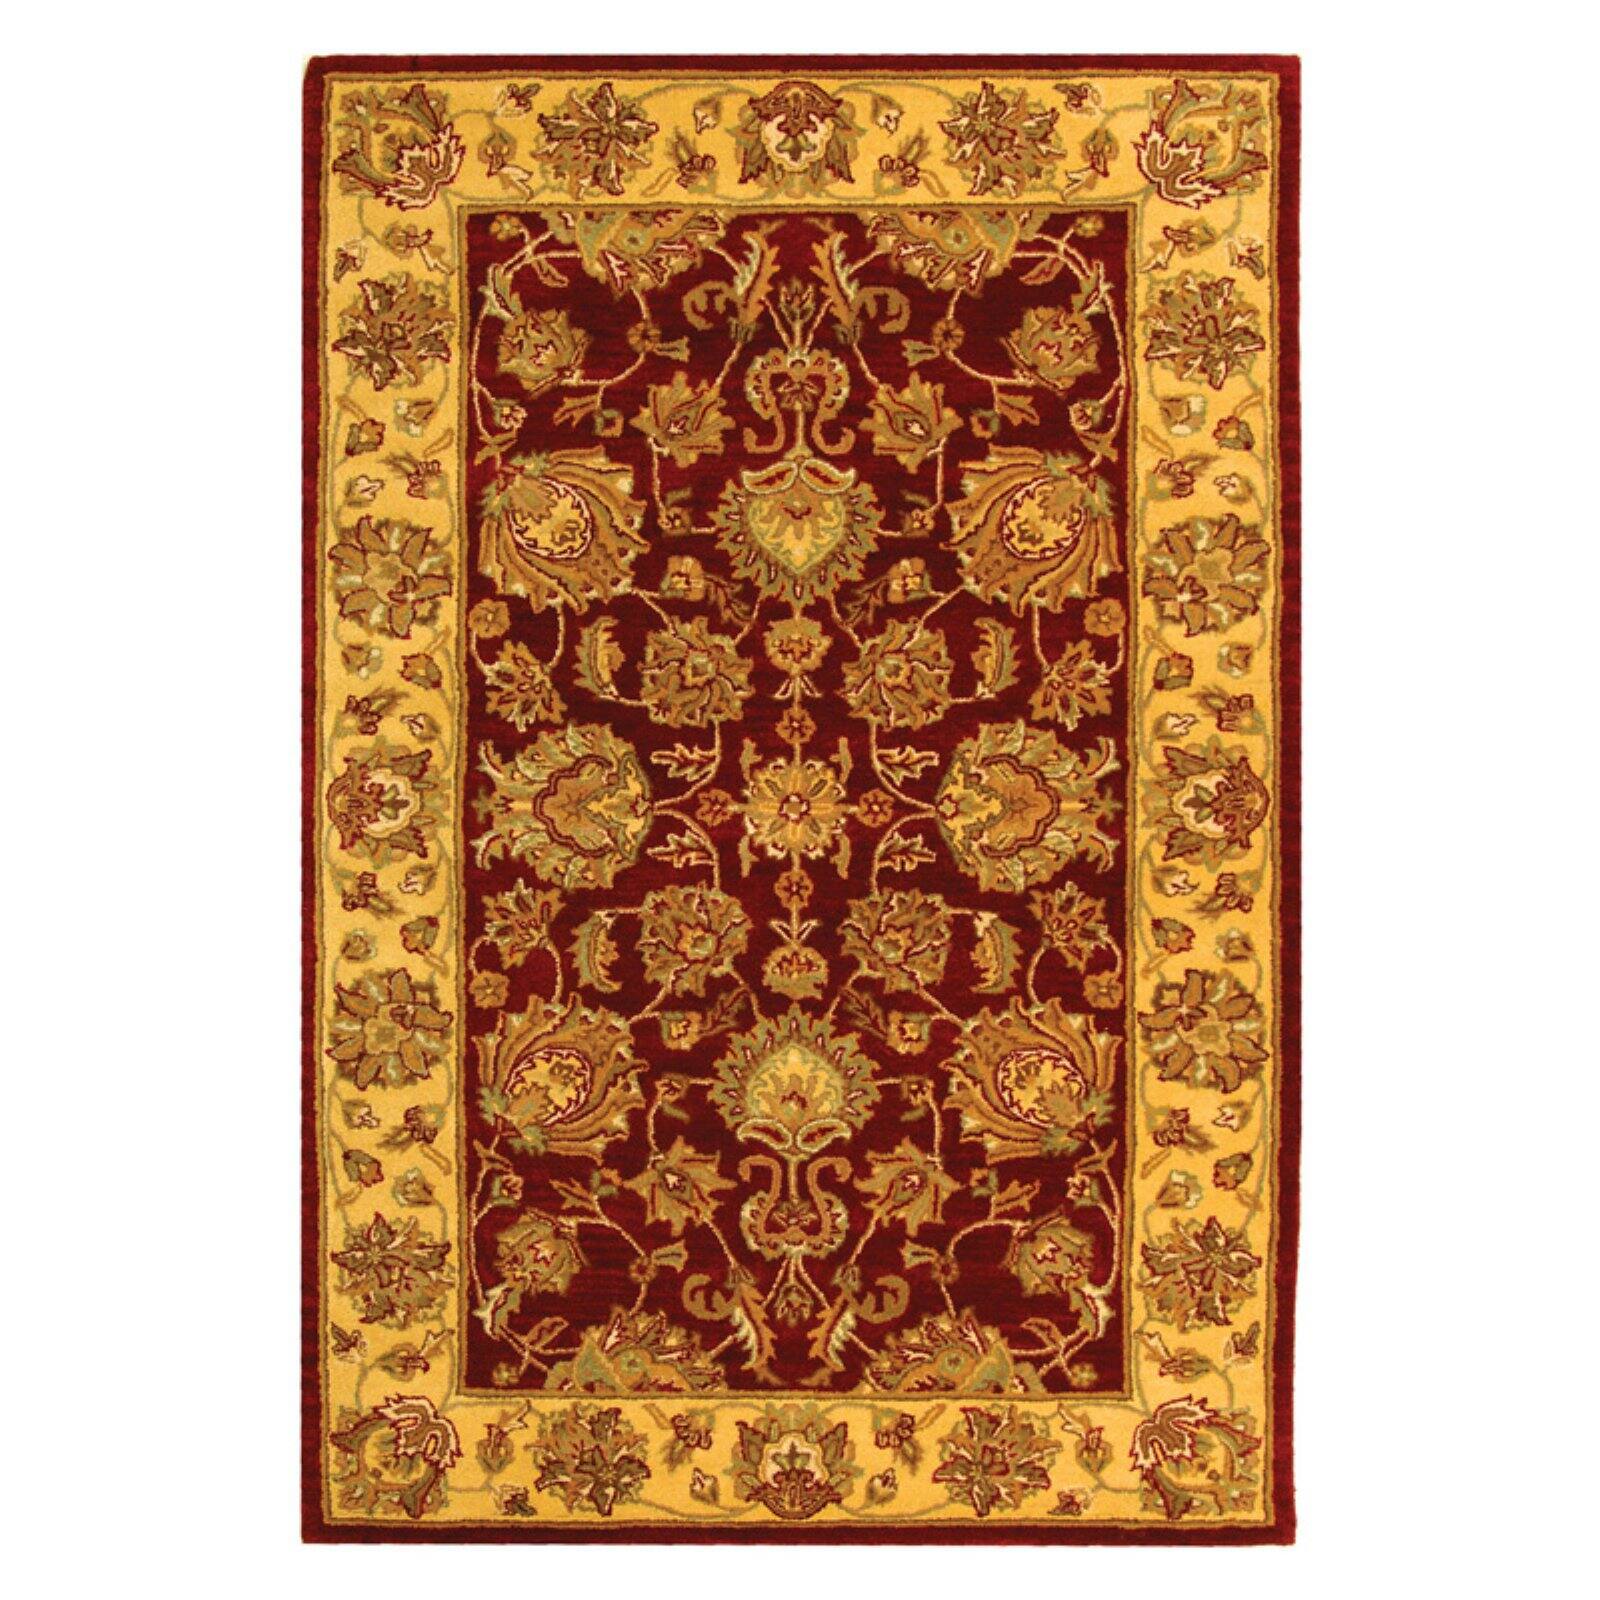 SAFAVIEH Heritage Regis Traditional Wool Area Rug, Red/Gold, 4' x 6' - image 4 of 9